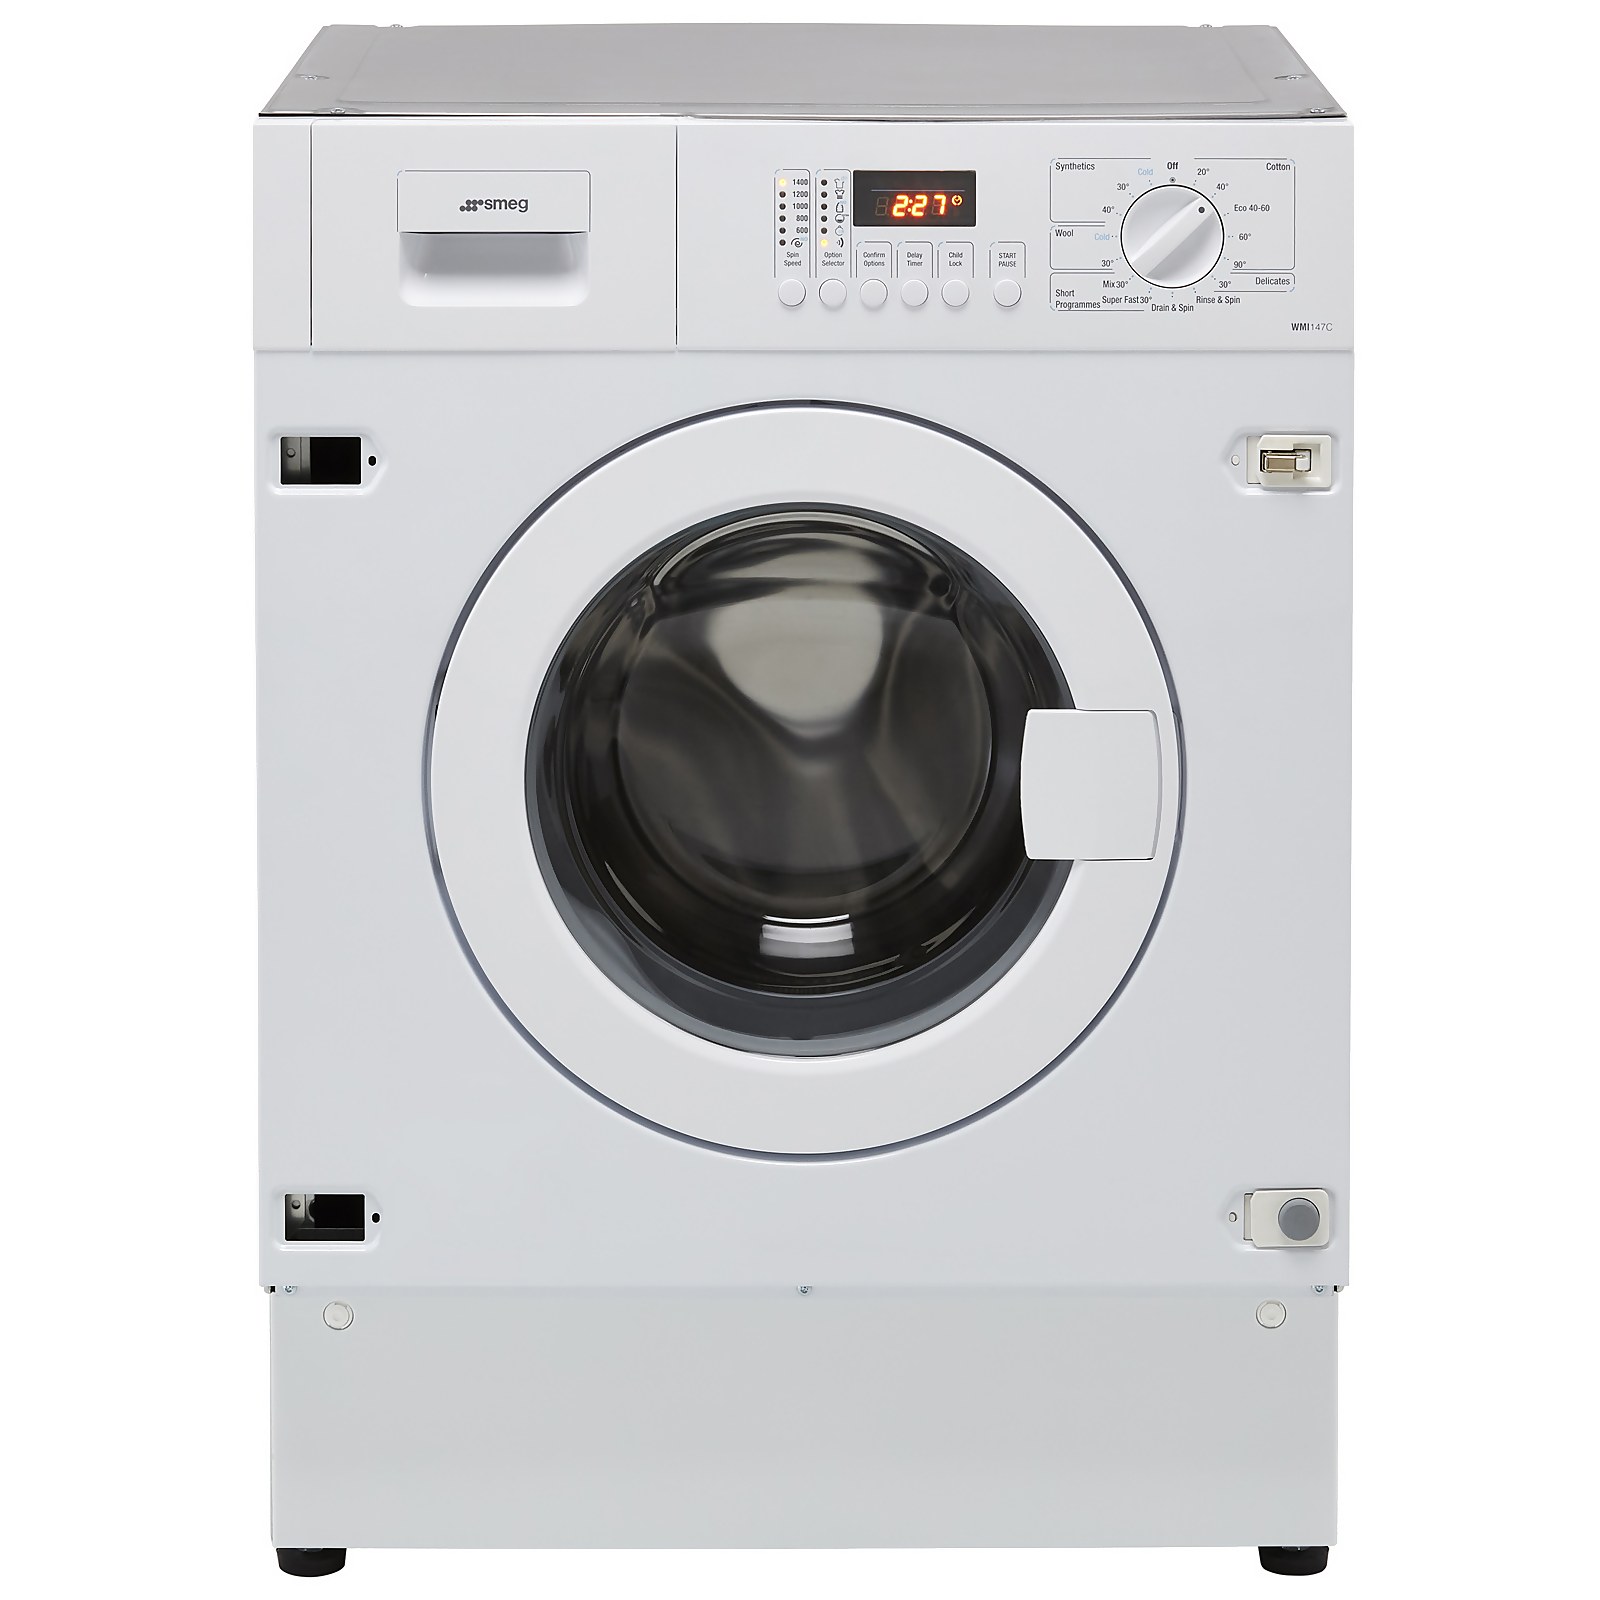 Smeg WMI147C Integrated 7Kg Washing Machine with 1400 rpm - White - E Rated